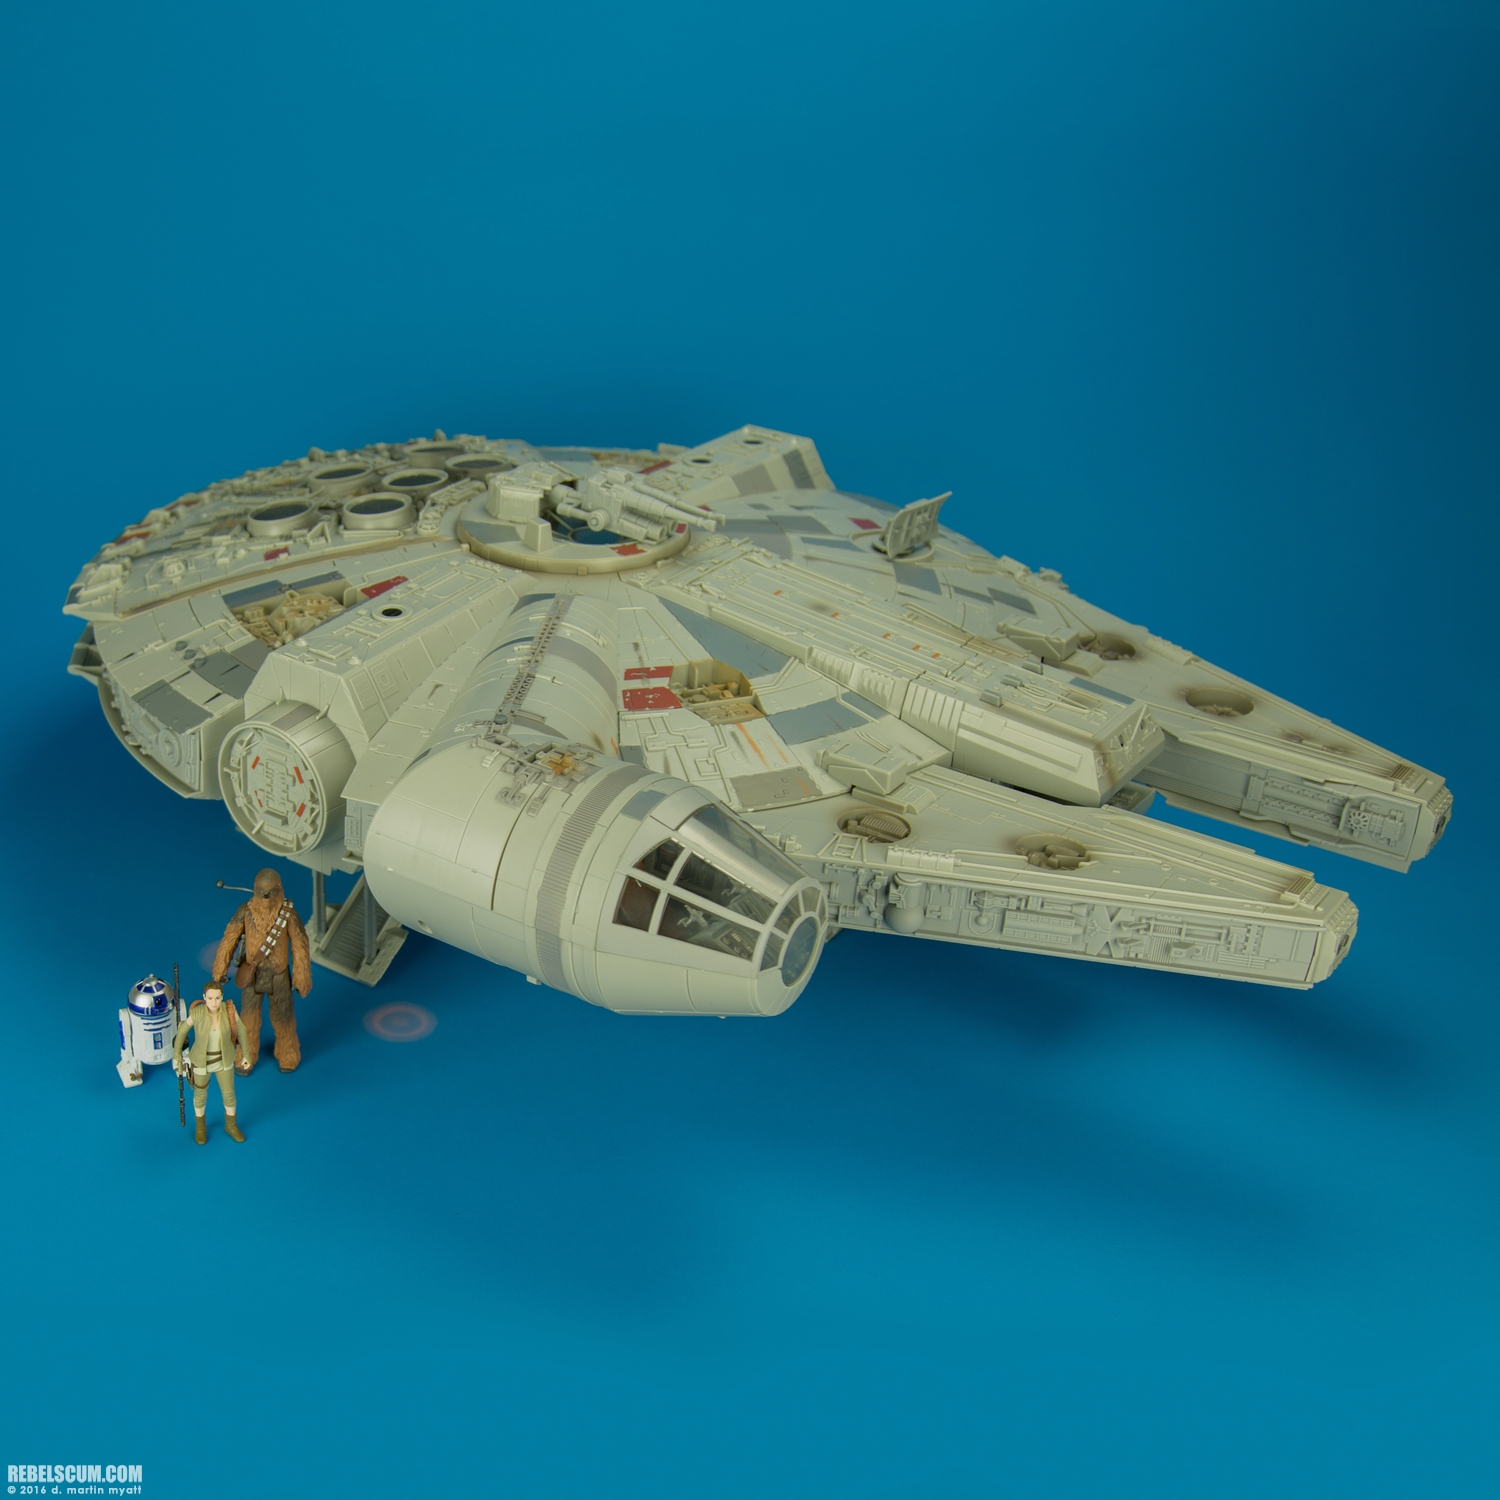 Rey-Resistance-Outfit-The-Force-Awakens-2016-Hasbro-015.jpg